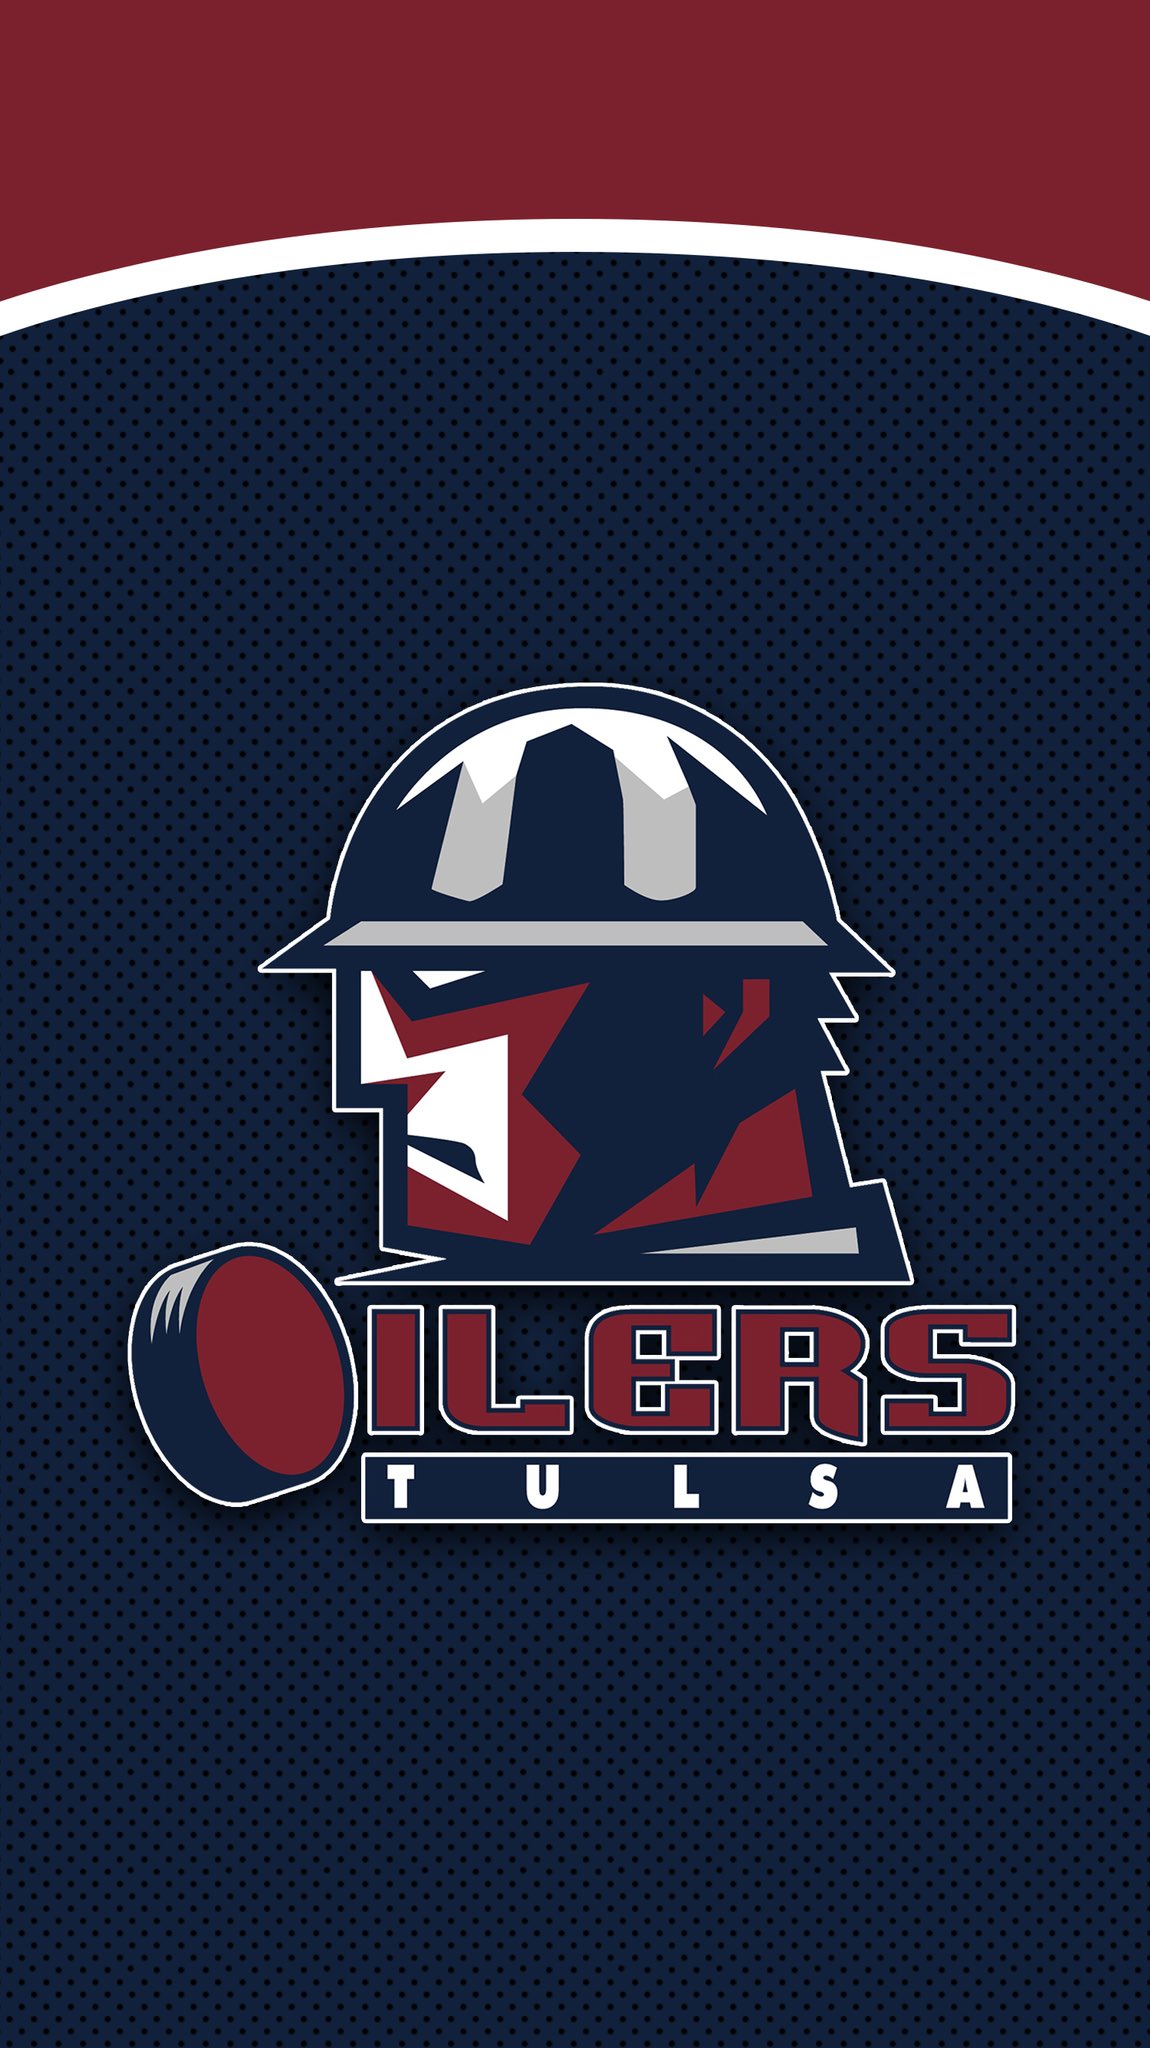 Tulsa Oilers on X: It's that time of the week again! It's